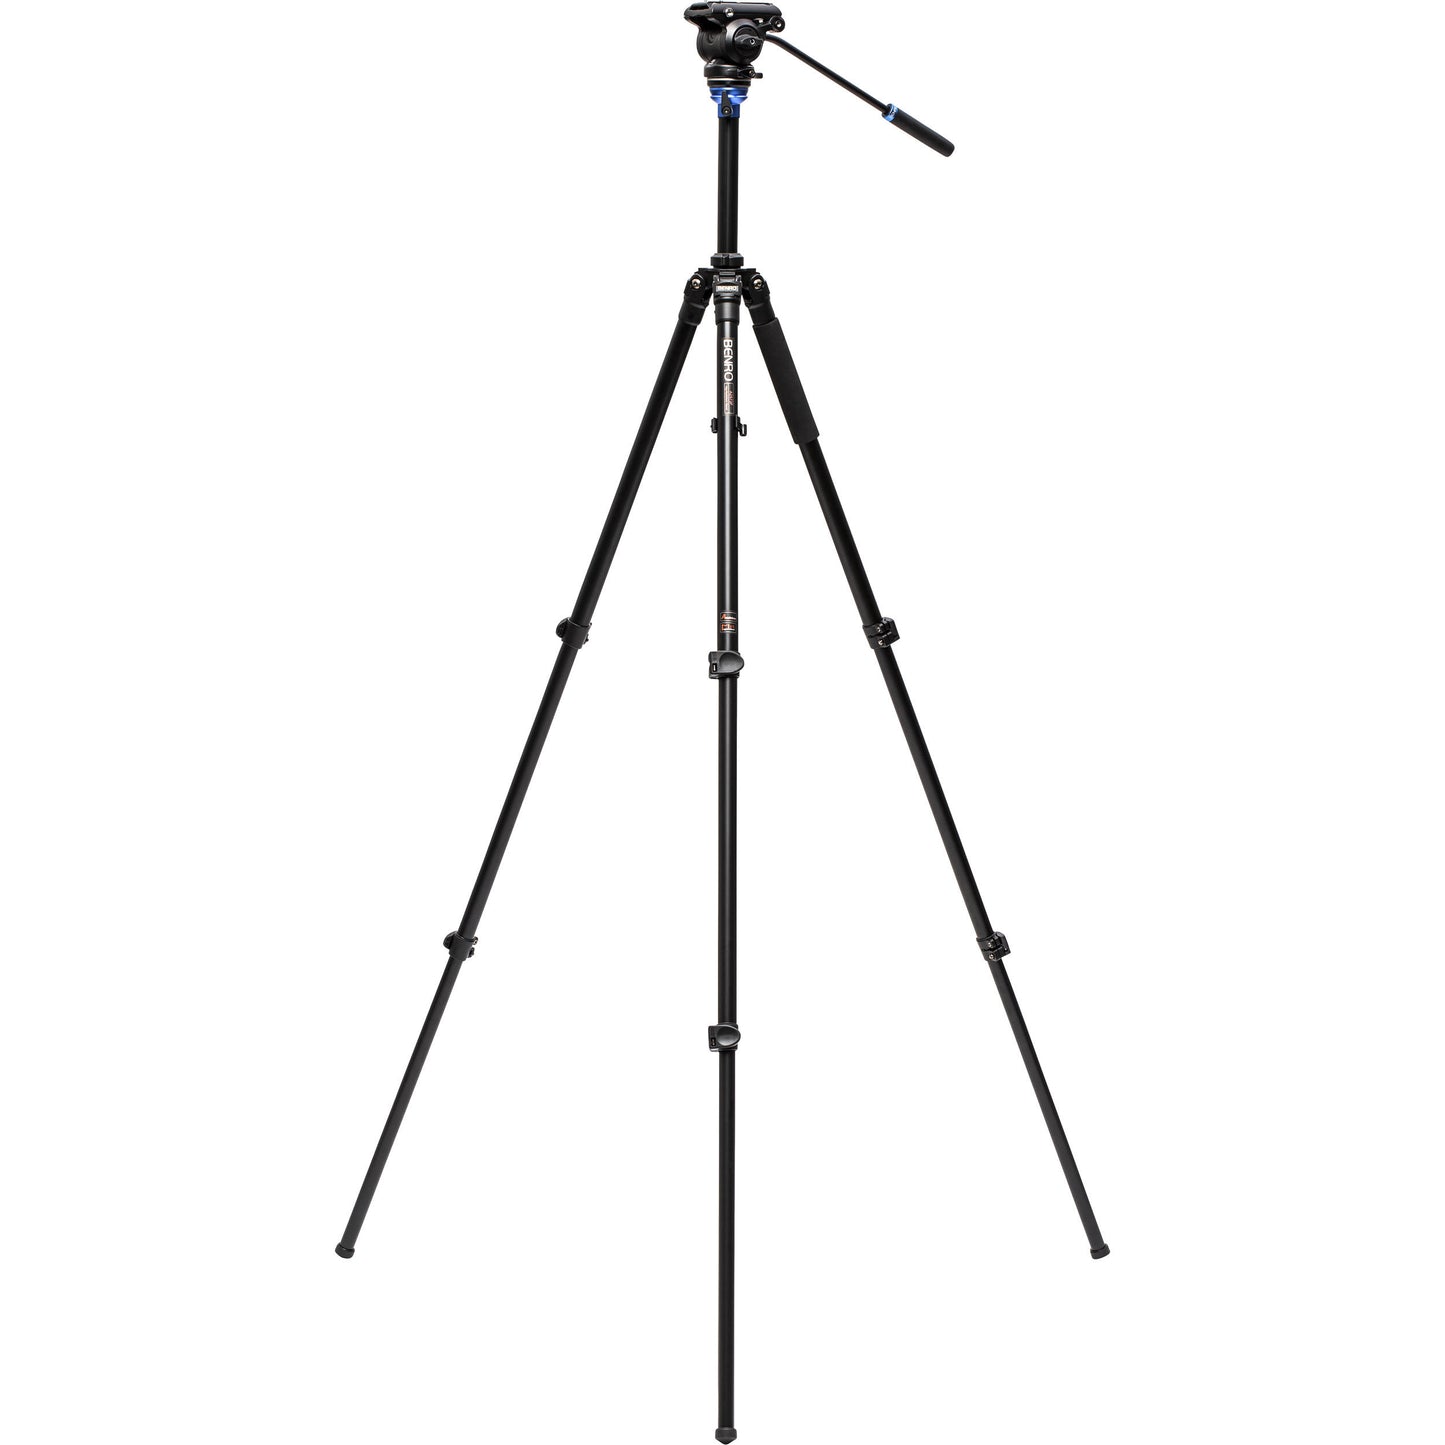 Benro A2573FS4 Aluminum Travel Tripod with S4Pro Fluid Video Head, 4kg Load Capacity, 360 Panning Range, for DSLR Camera